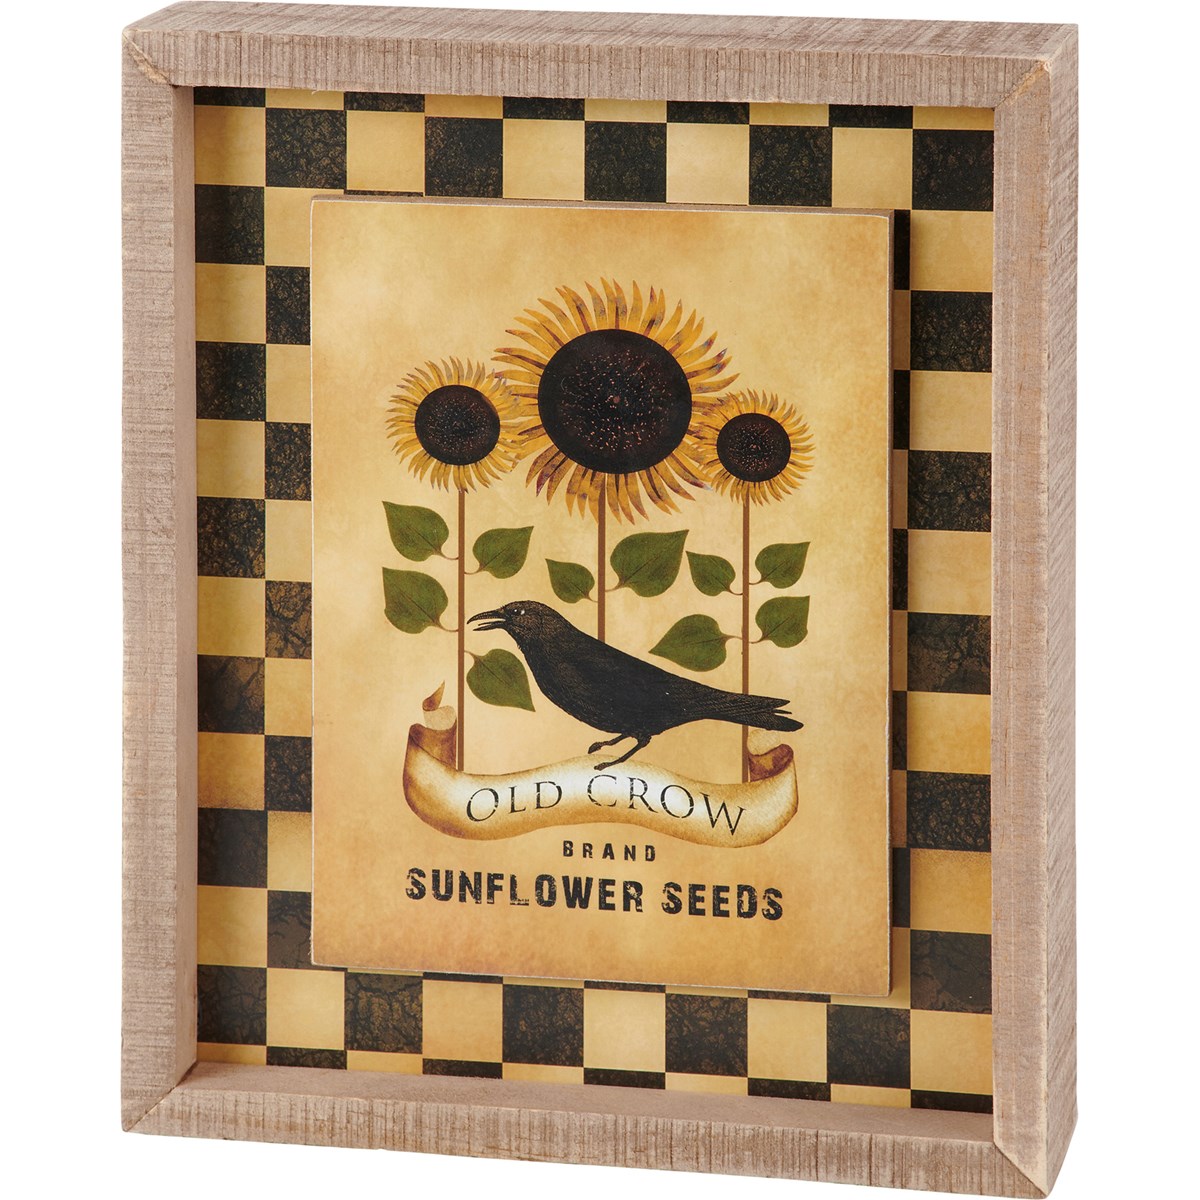 Old Crow Sunflower Seeds Inset Box Sign - Wood, Paper